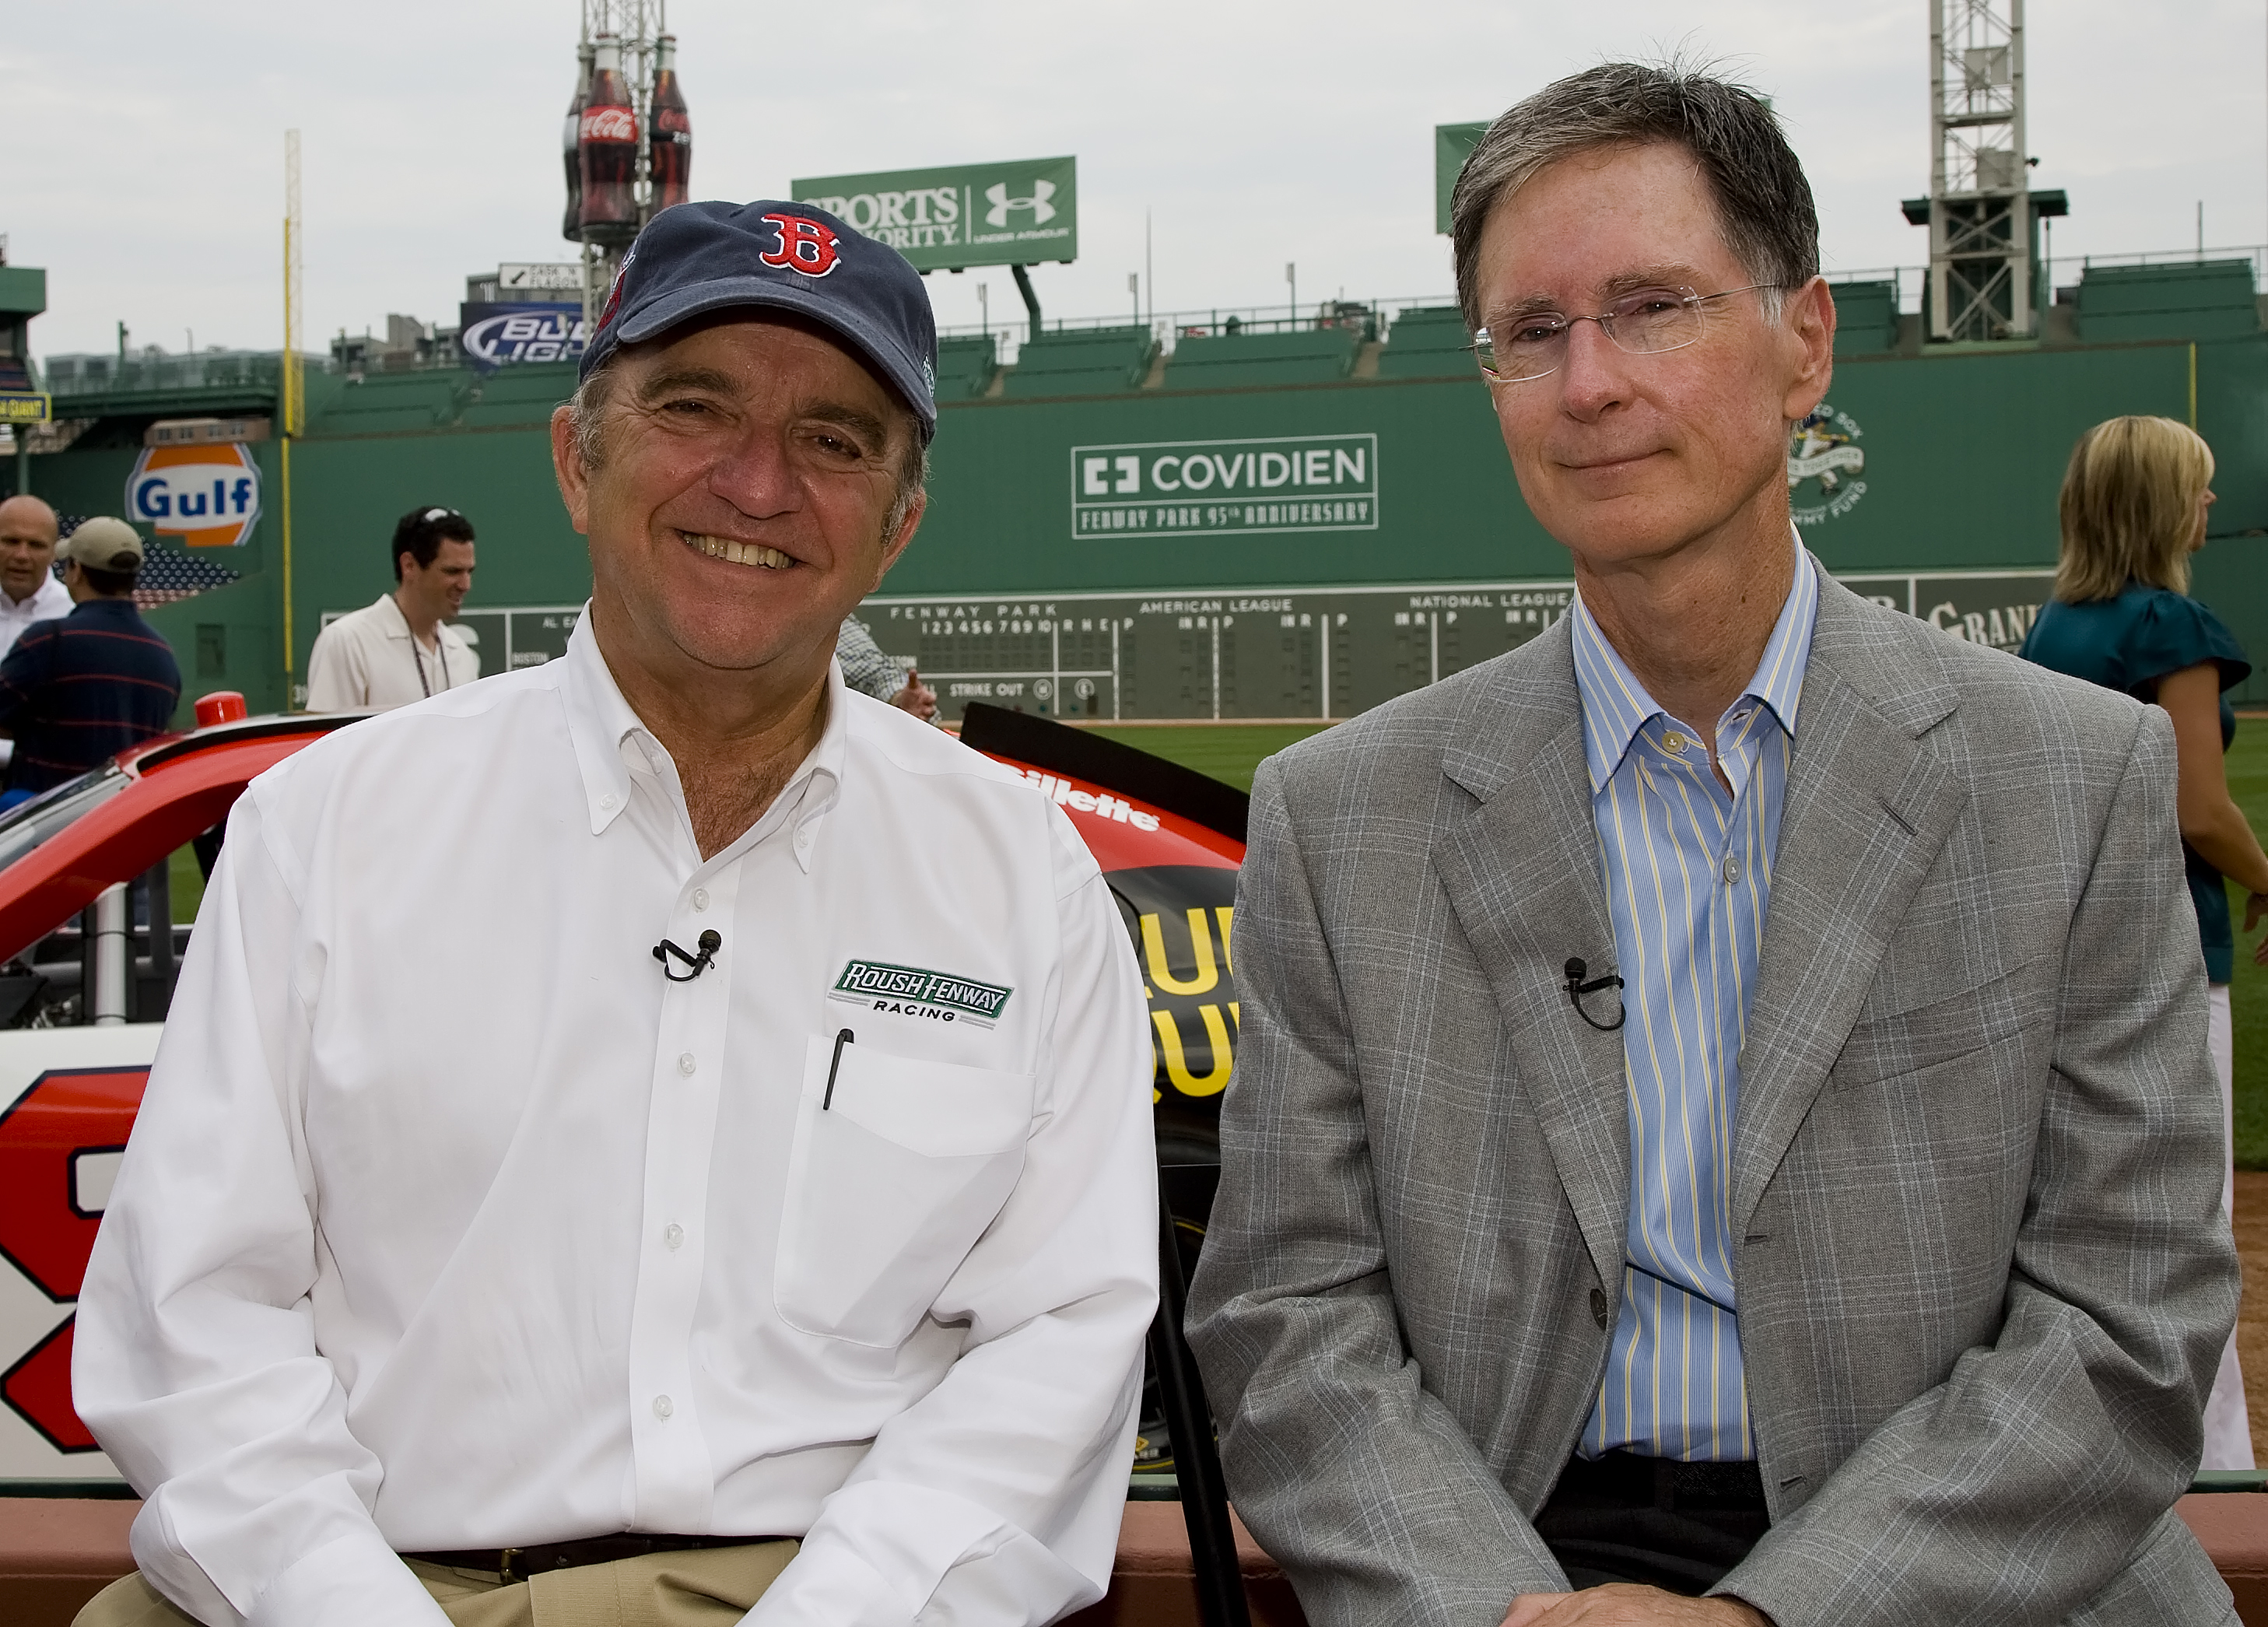 STATEMENT FROM FENWAY SPORTS GROUP PRINCIPAL OWNER JOHN W. HENRY